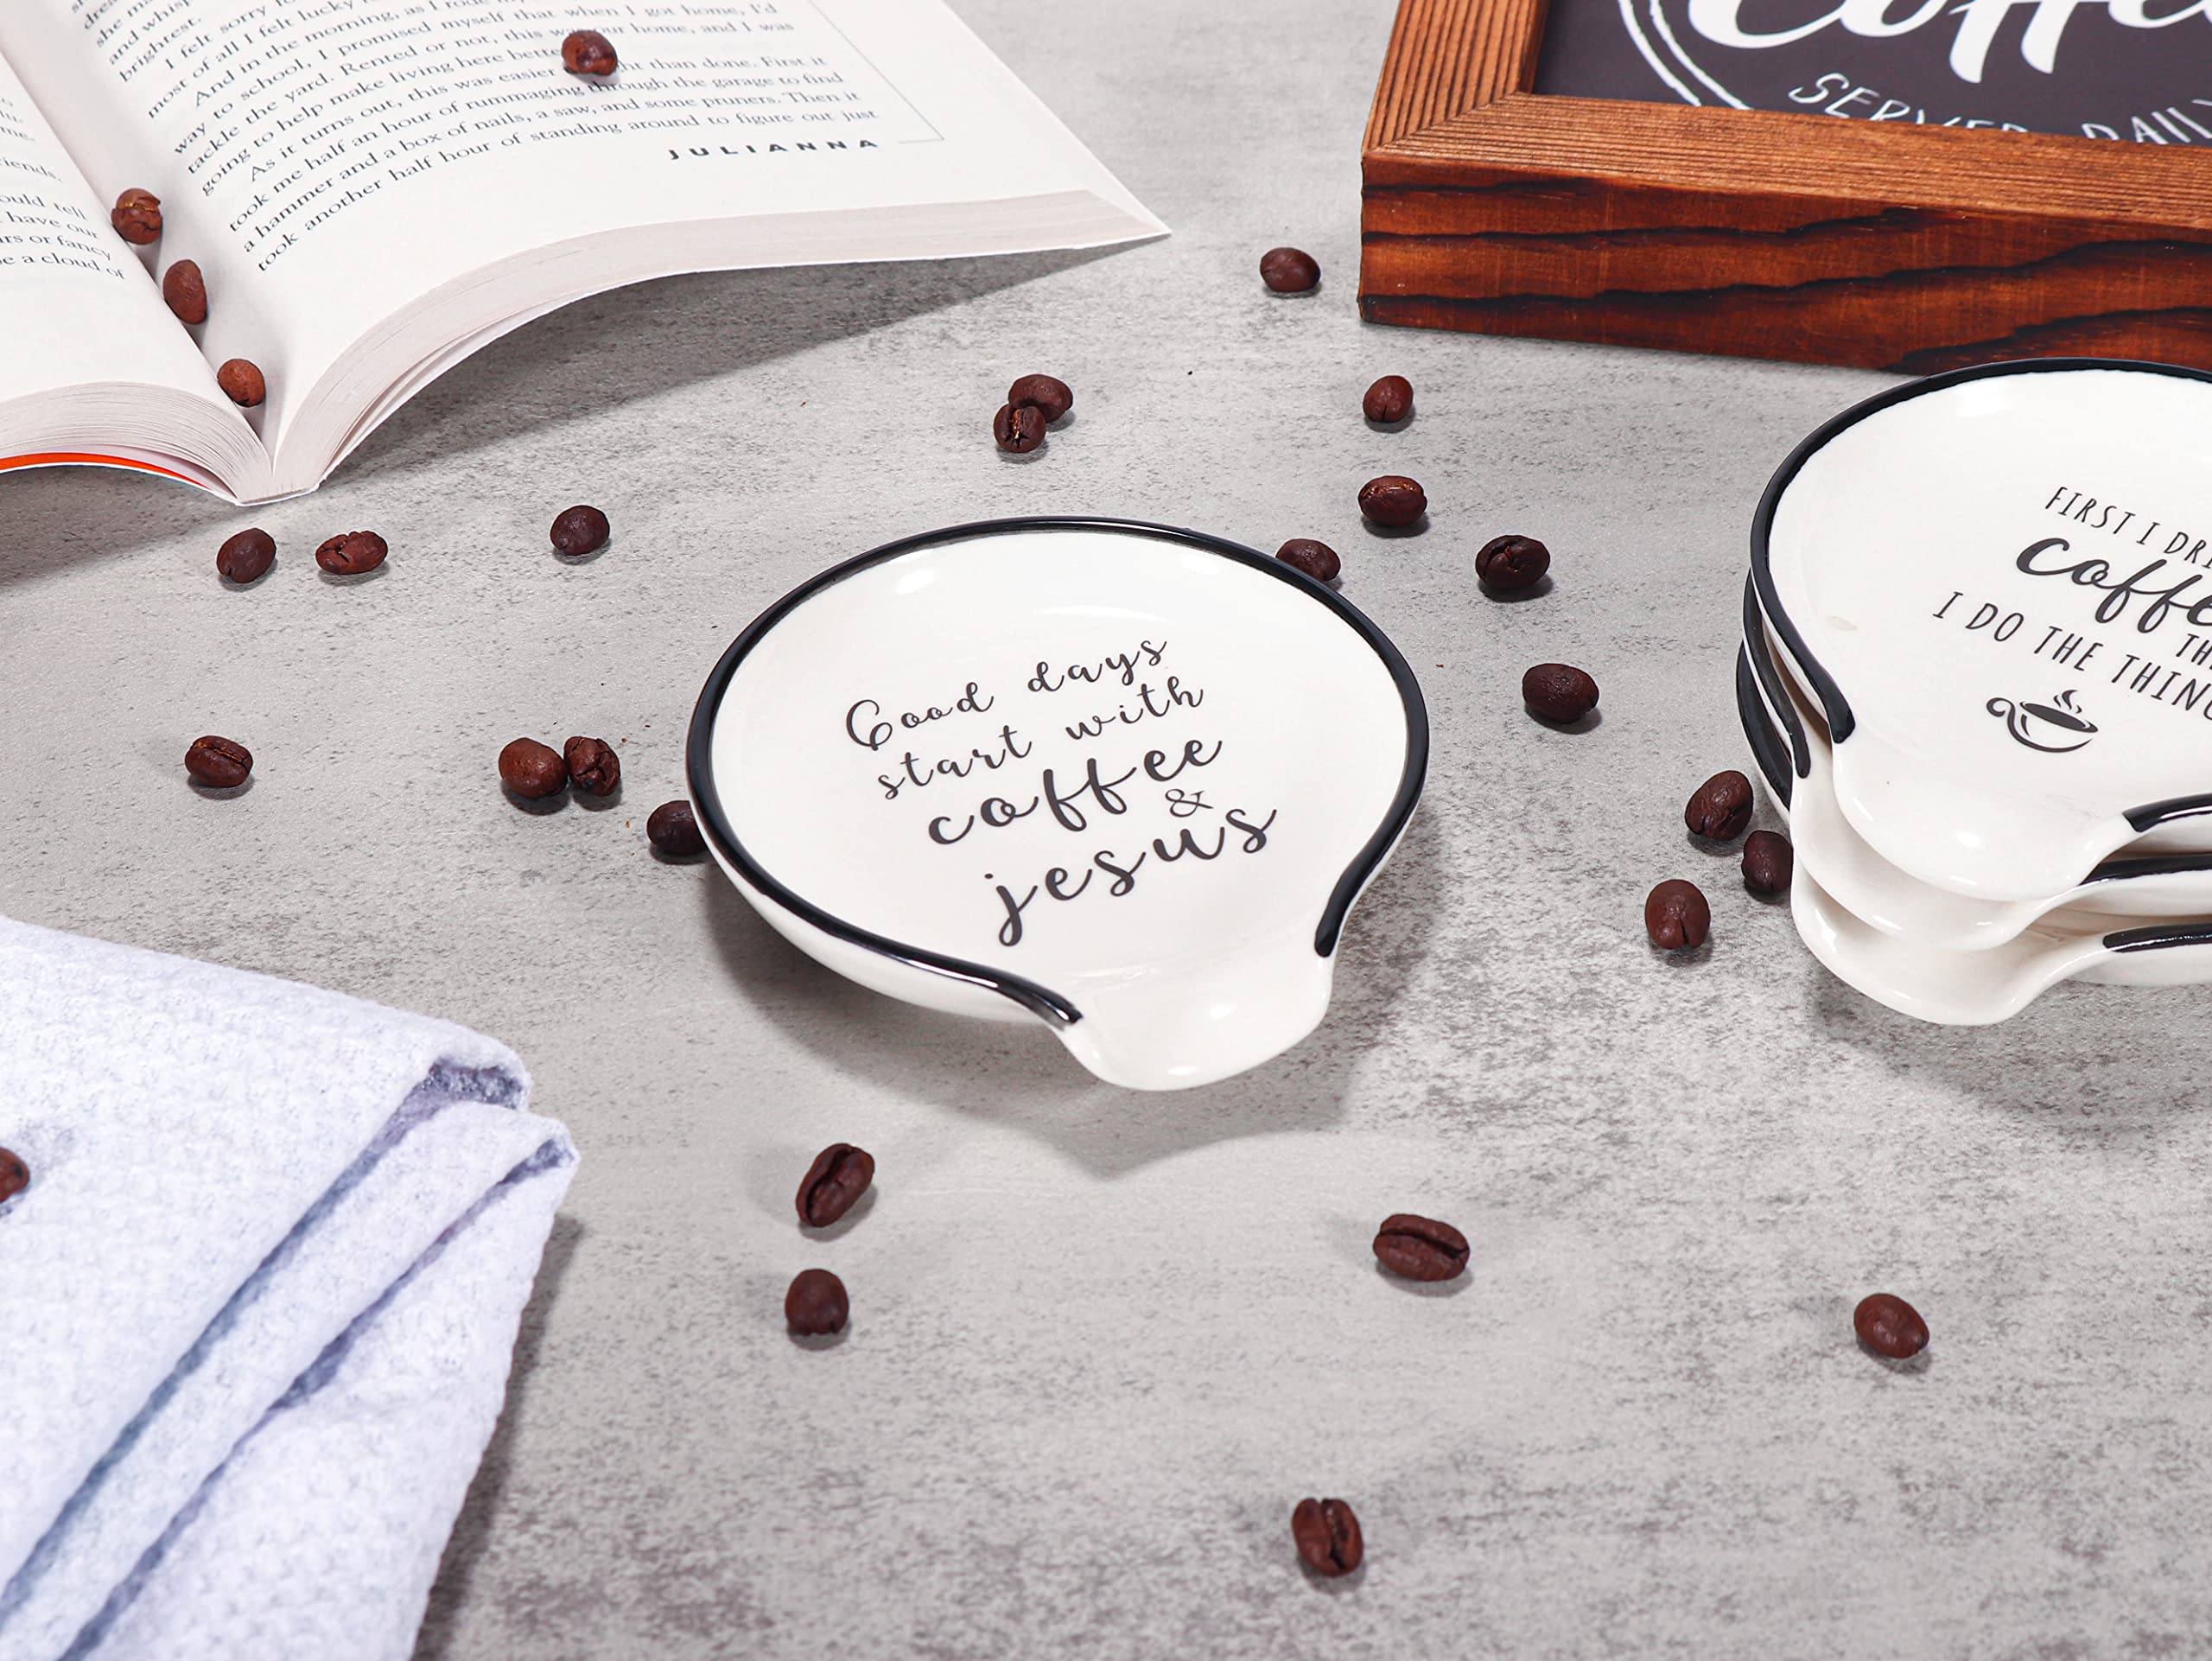 Christian Gifts for Women Men, Coffee Spoon Rest Holder, Coffee Bar Table Decor, Coffee Lover Accessories- Good Days Start with Coffee and Jesus - 05